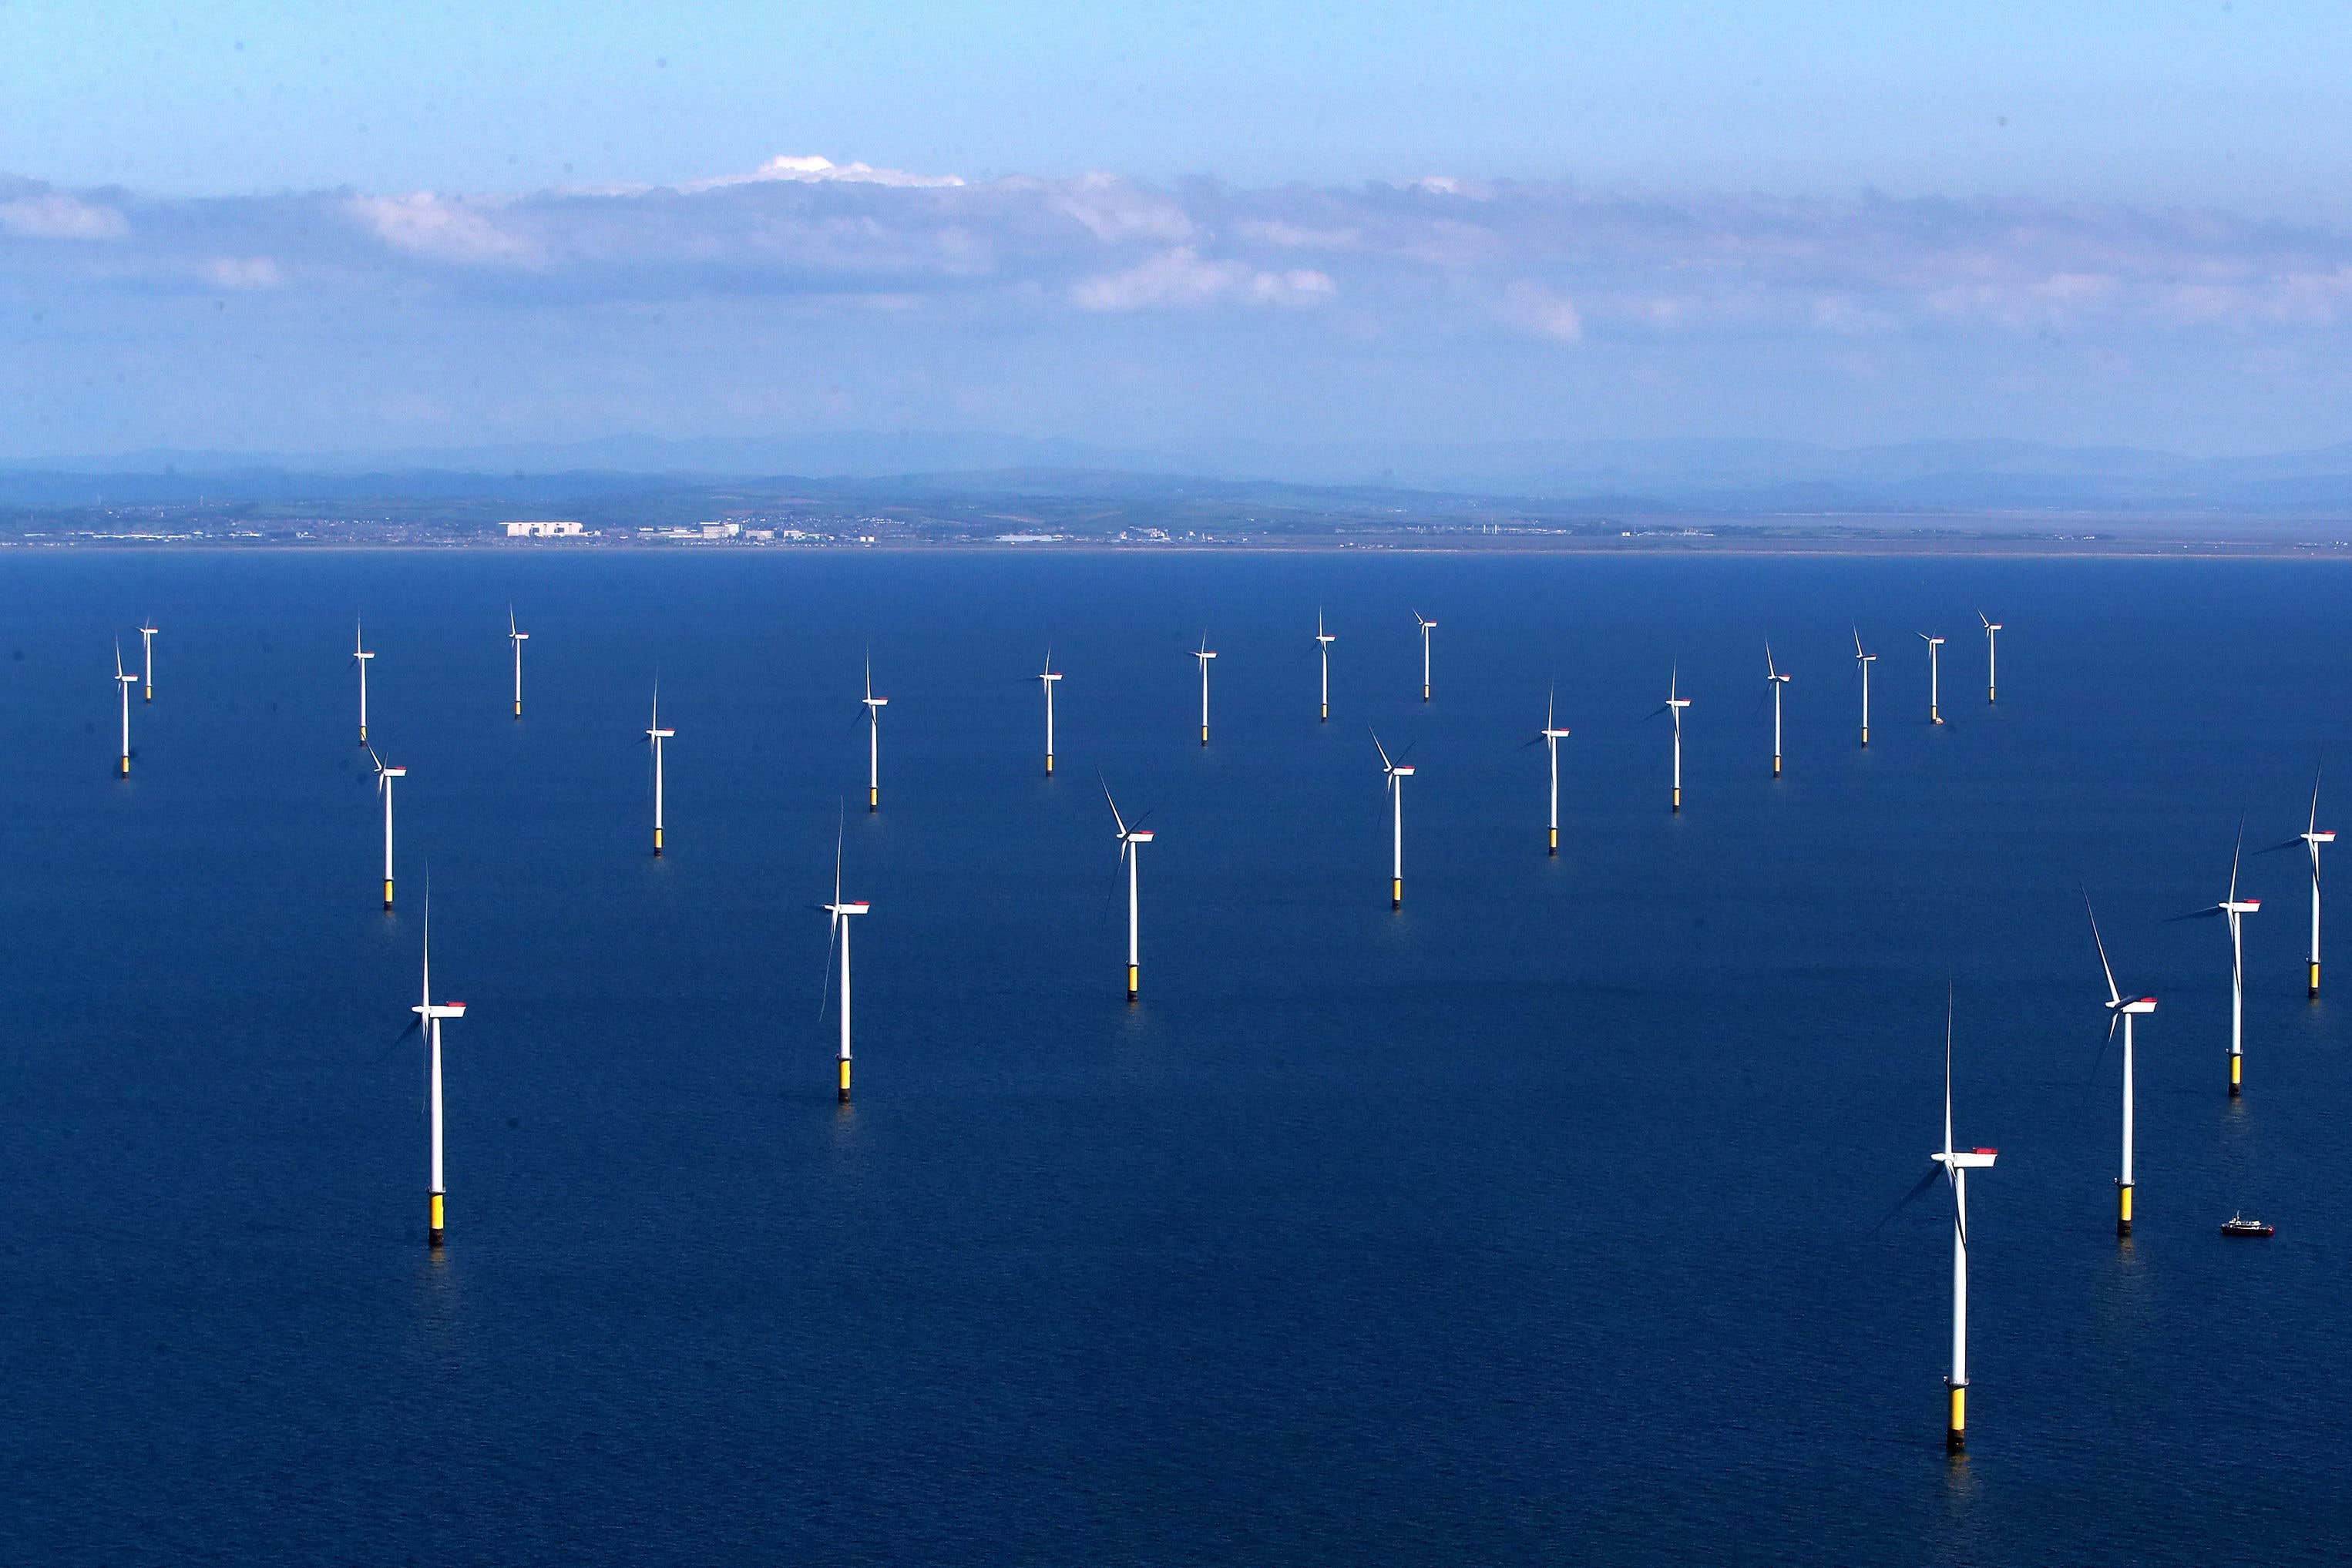 World's largest wind turbine is now fully operational and connected